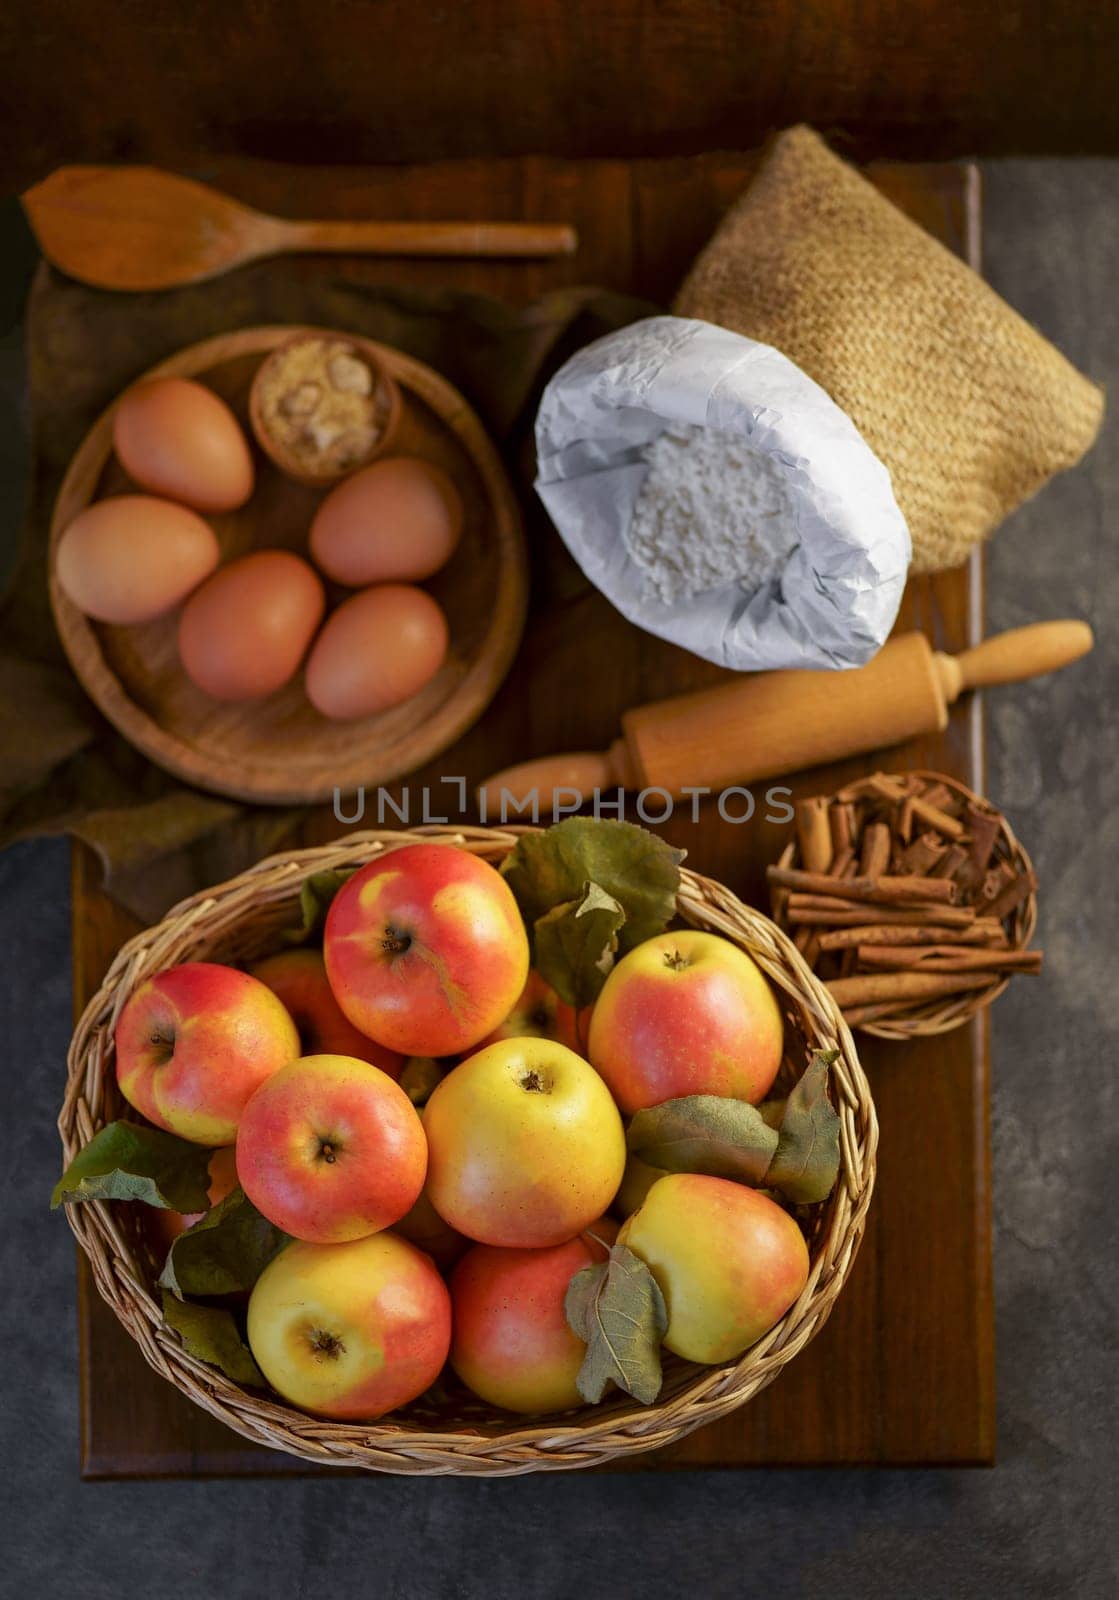 preparation to bake an apple pie on a wooden table by aprilphoto